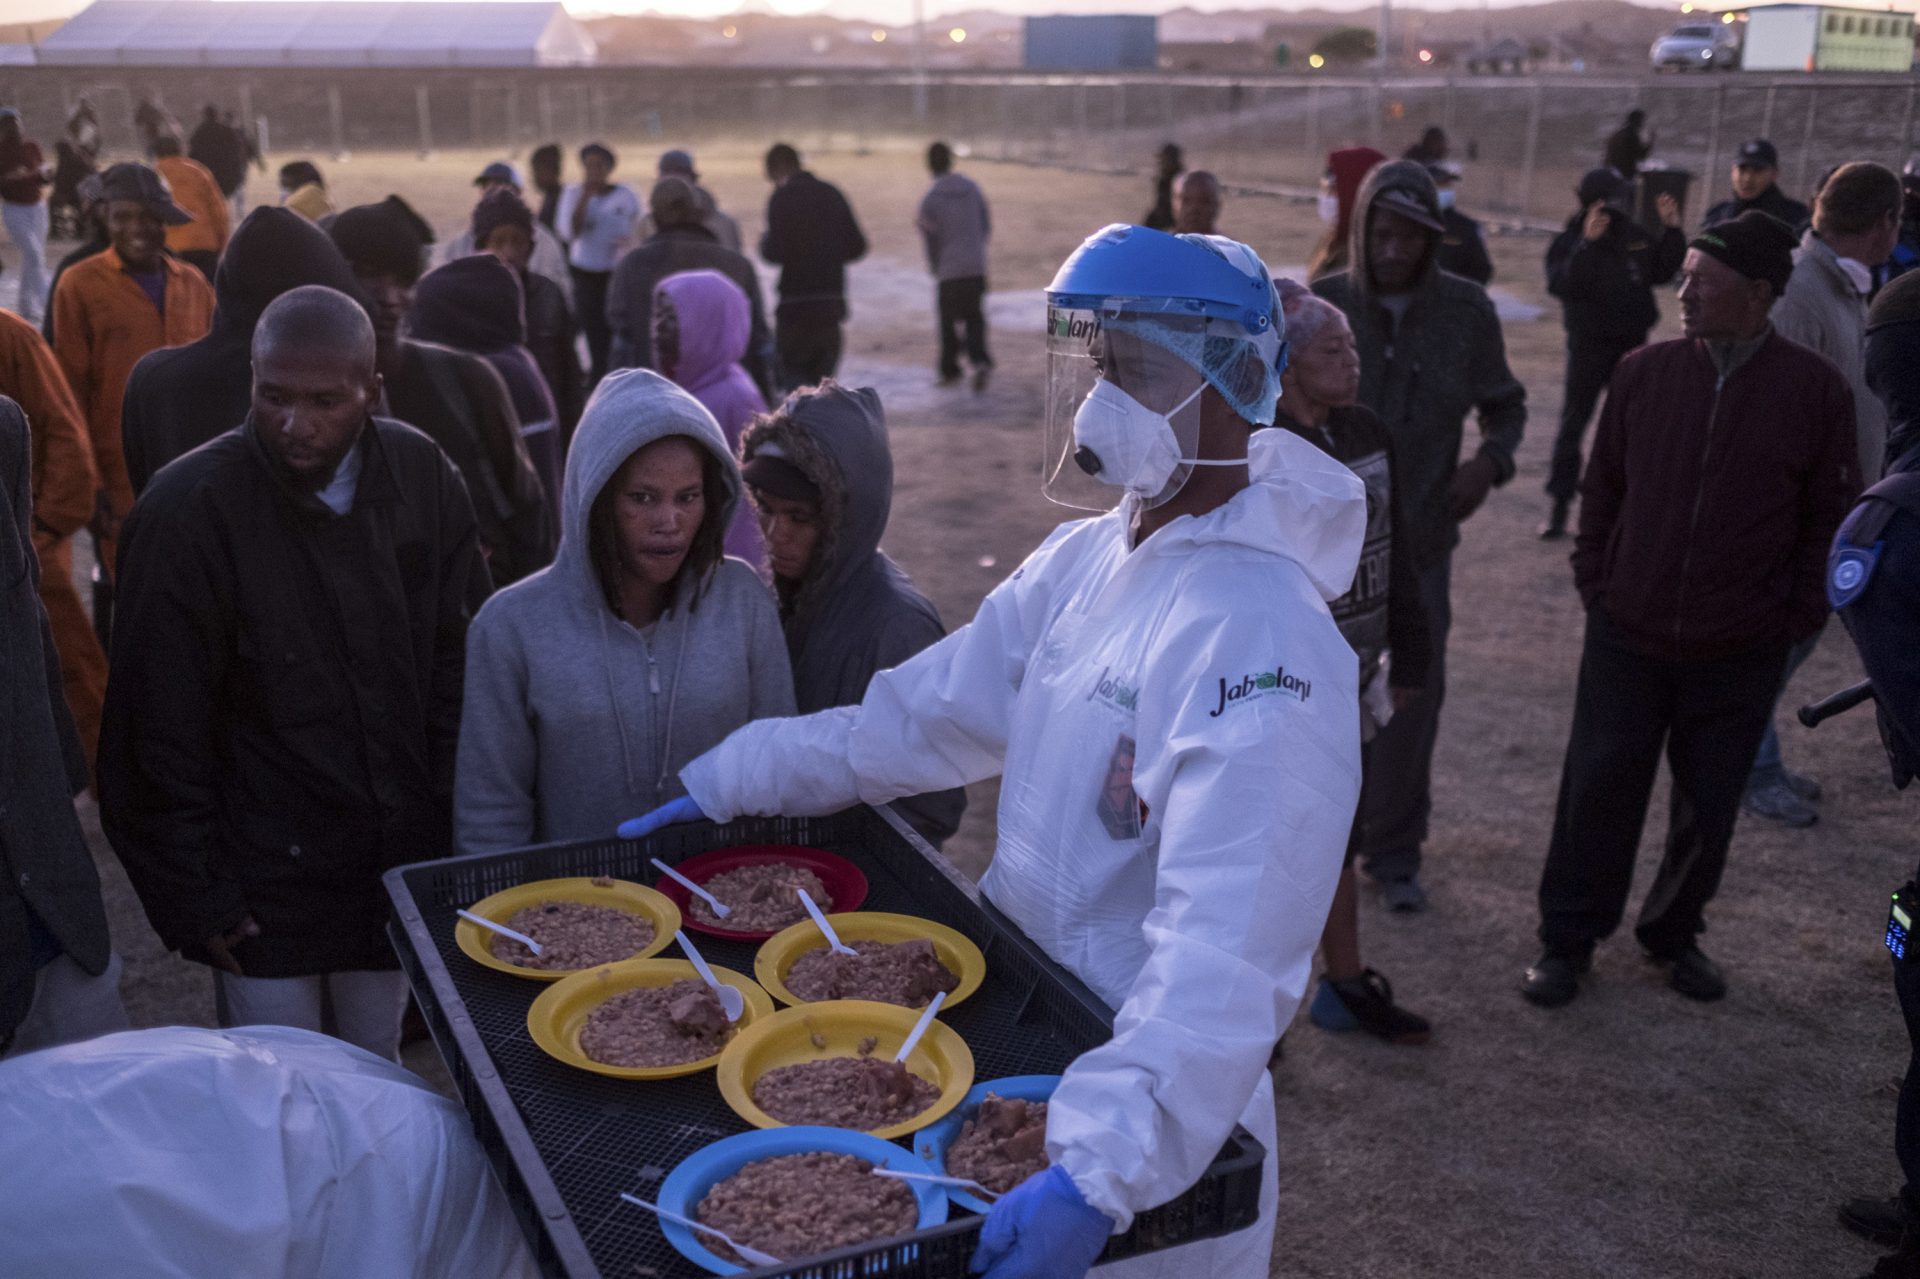 People receive food at a camp set up to house them during the coronavirus lockdown in Cape Town. Many are unhappy with the conditions of their confinement and worry that overcrowding poses a risk of catching the virus.